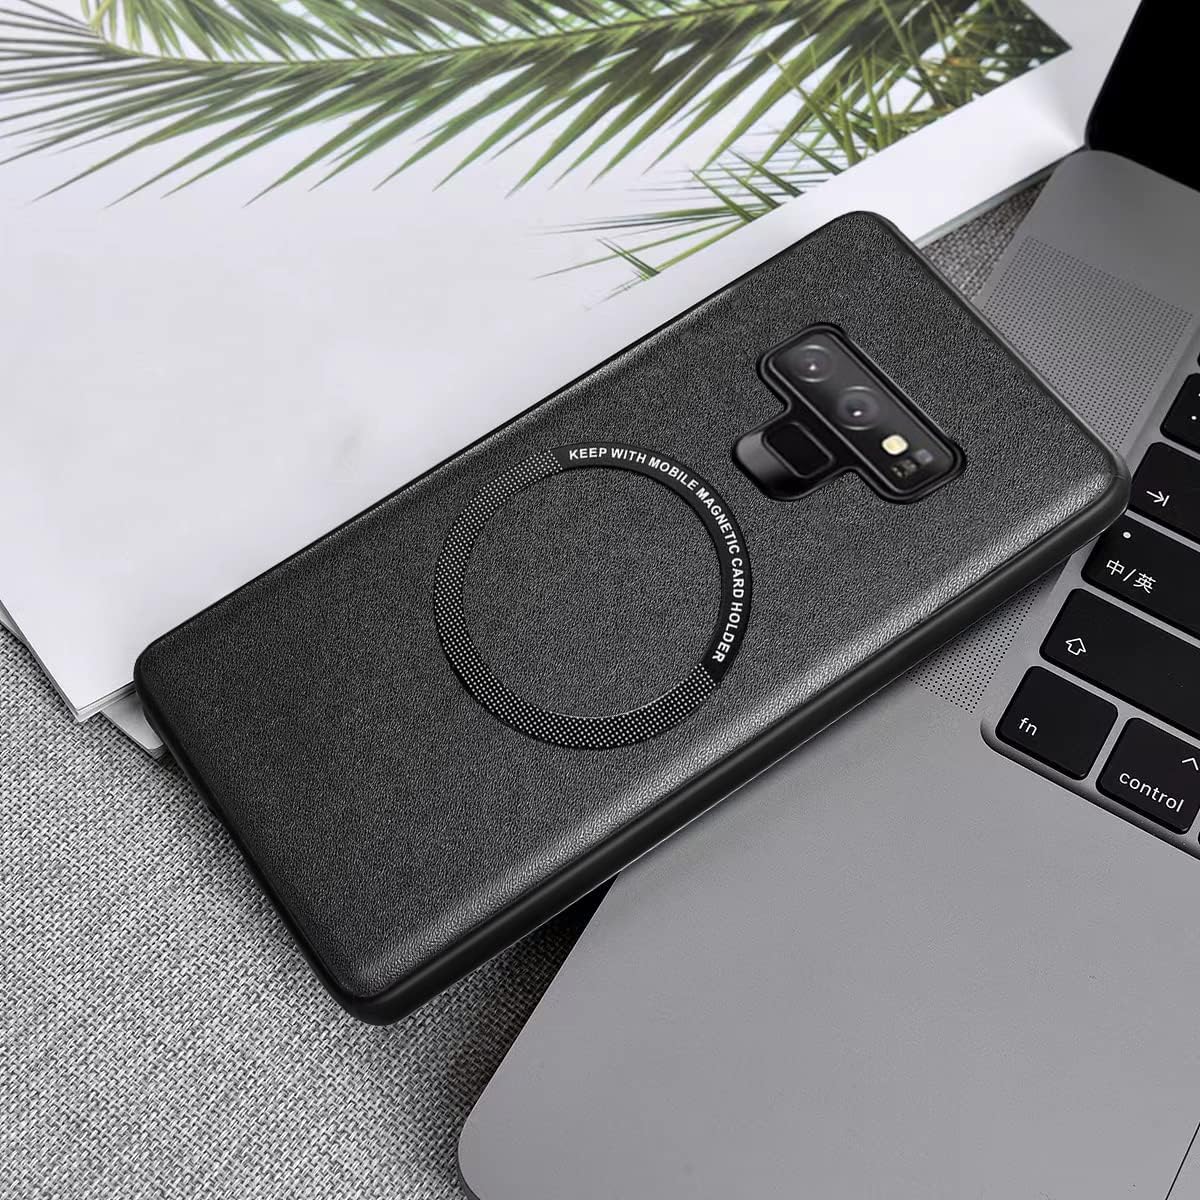 SHBDZGS for Samsung Galaxy Note 9 Case [Compatible with Magsafe] Metal Ring, Premium Leather TPU Hybrid Case - Elegant Soft TPU Anti-Slip Scratch Full Protective Cover for Samsung Galaxy Note 9,Black